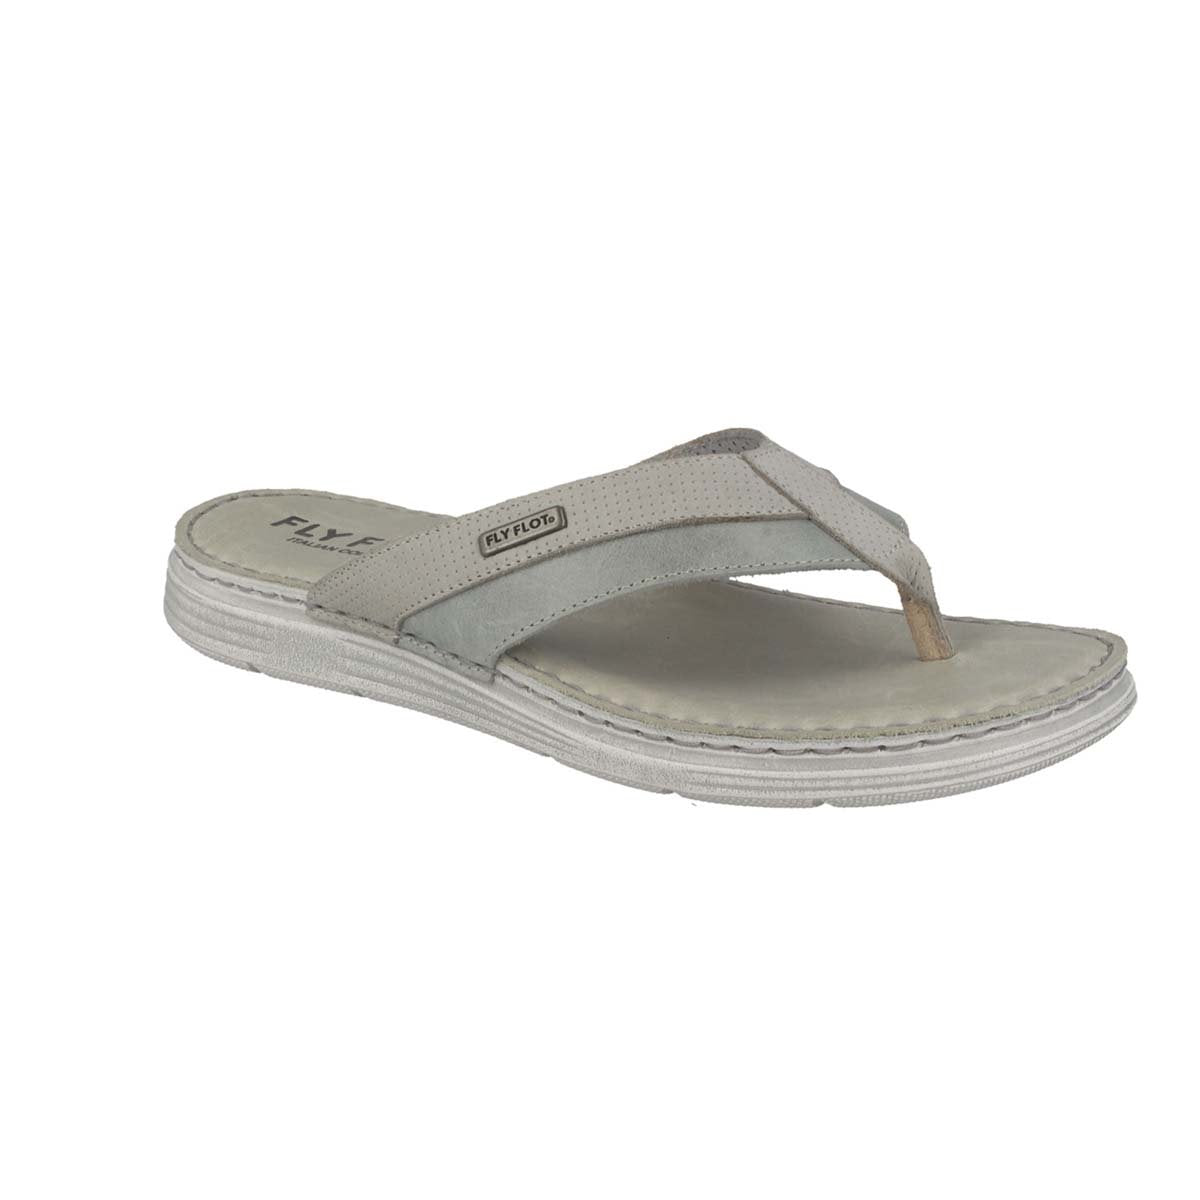 Photo of the Leather Man Slipper Grey (68128tg)